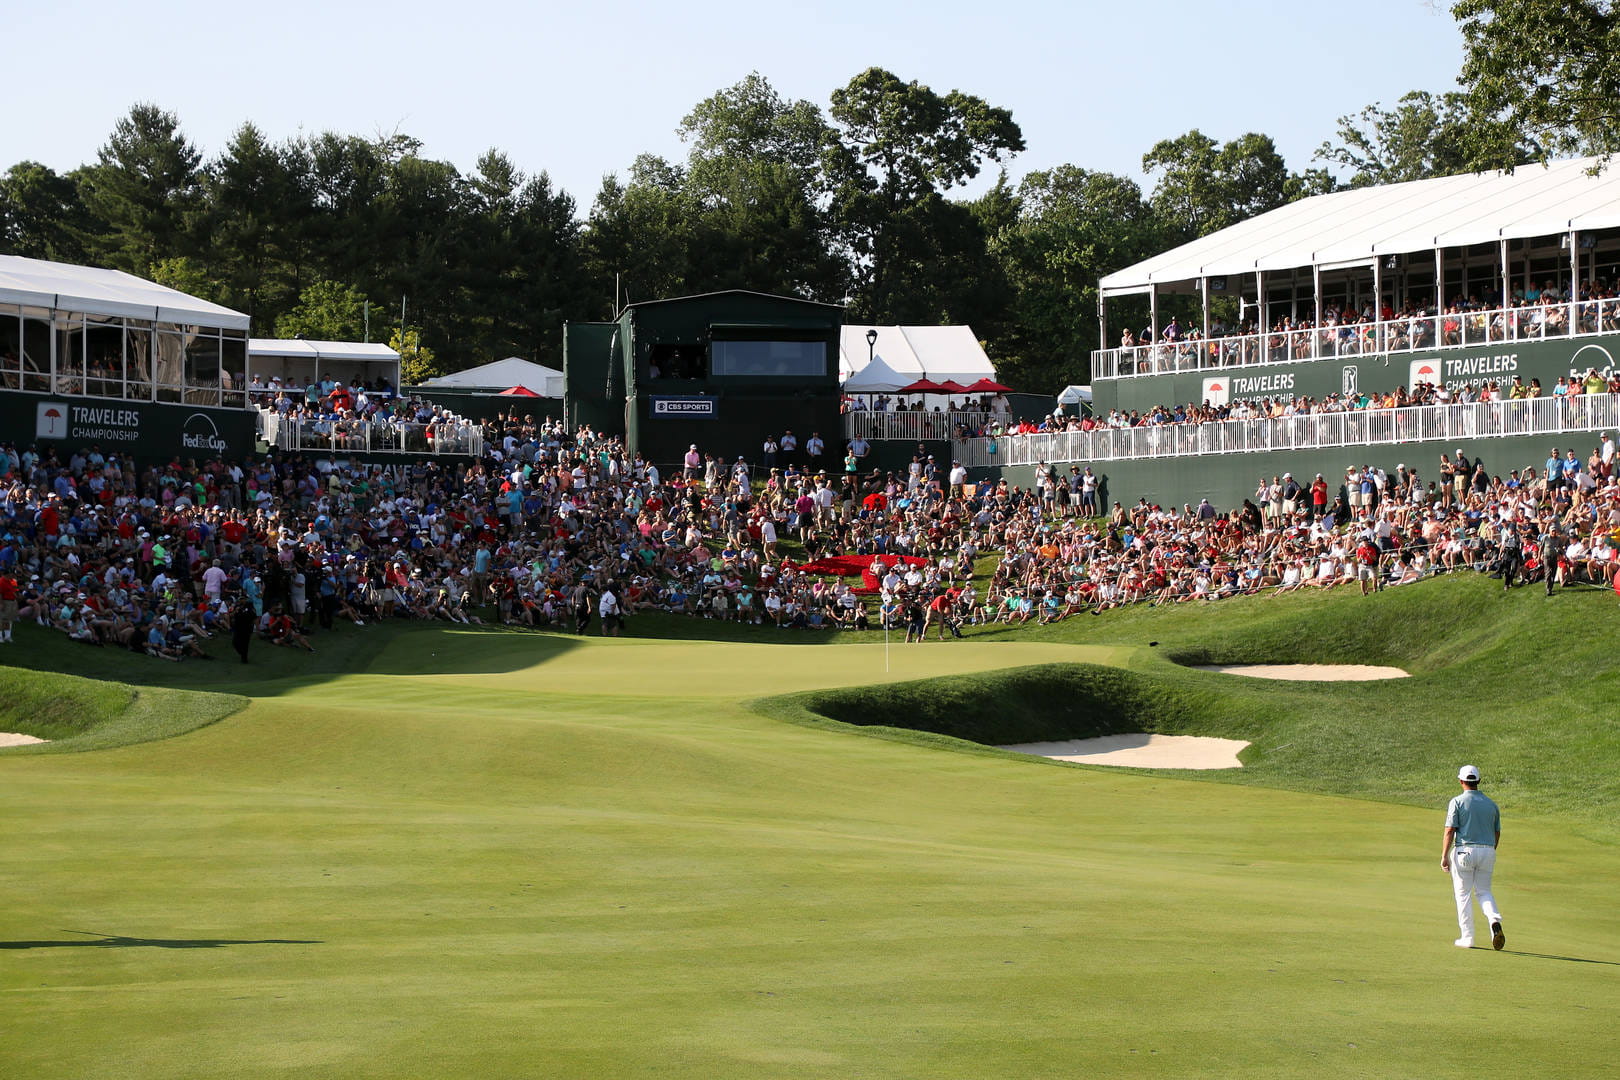 The Open Travelers Championship